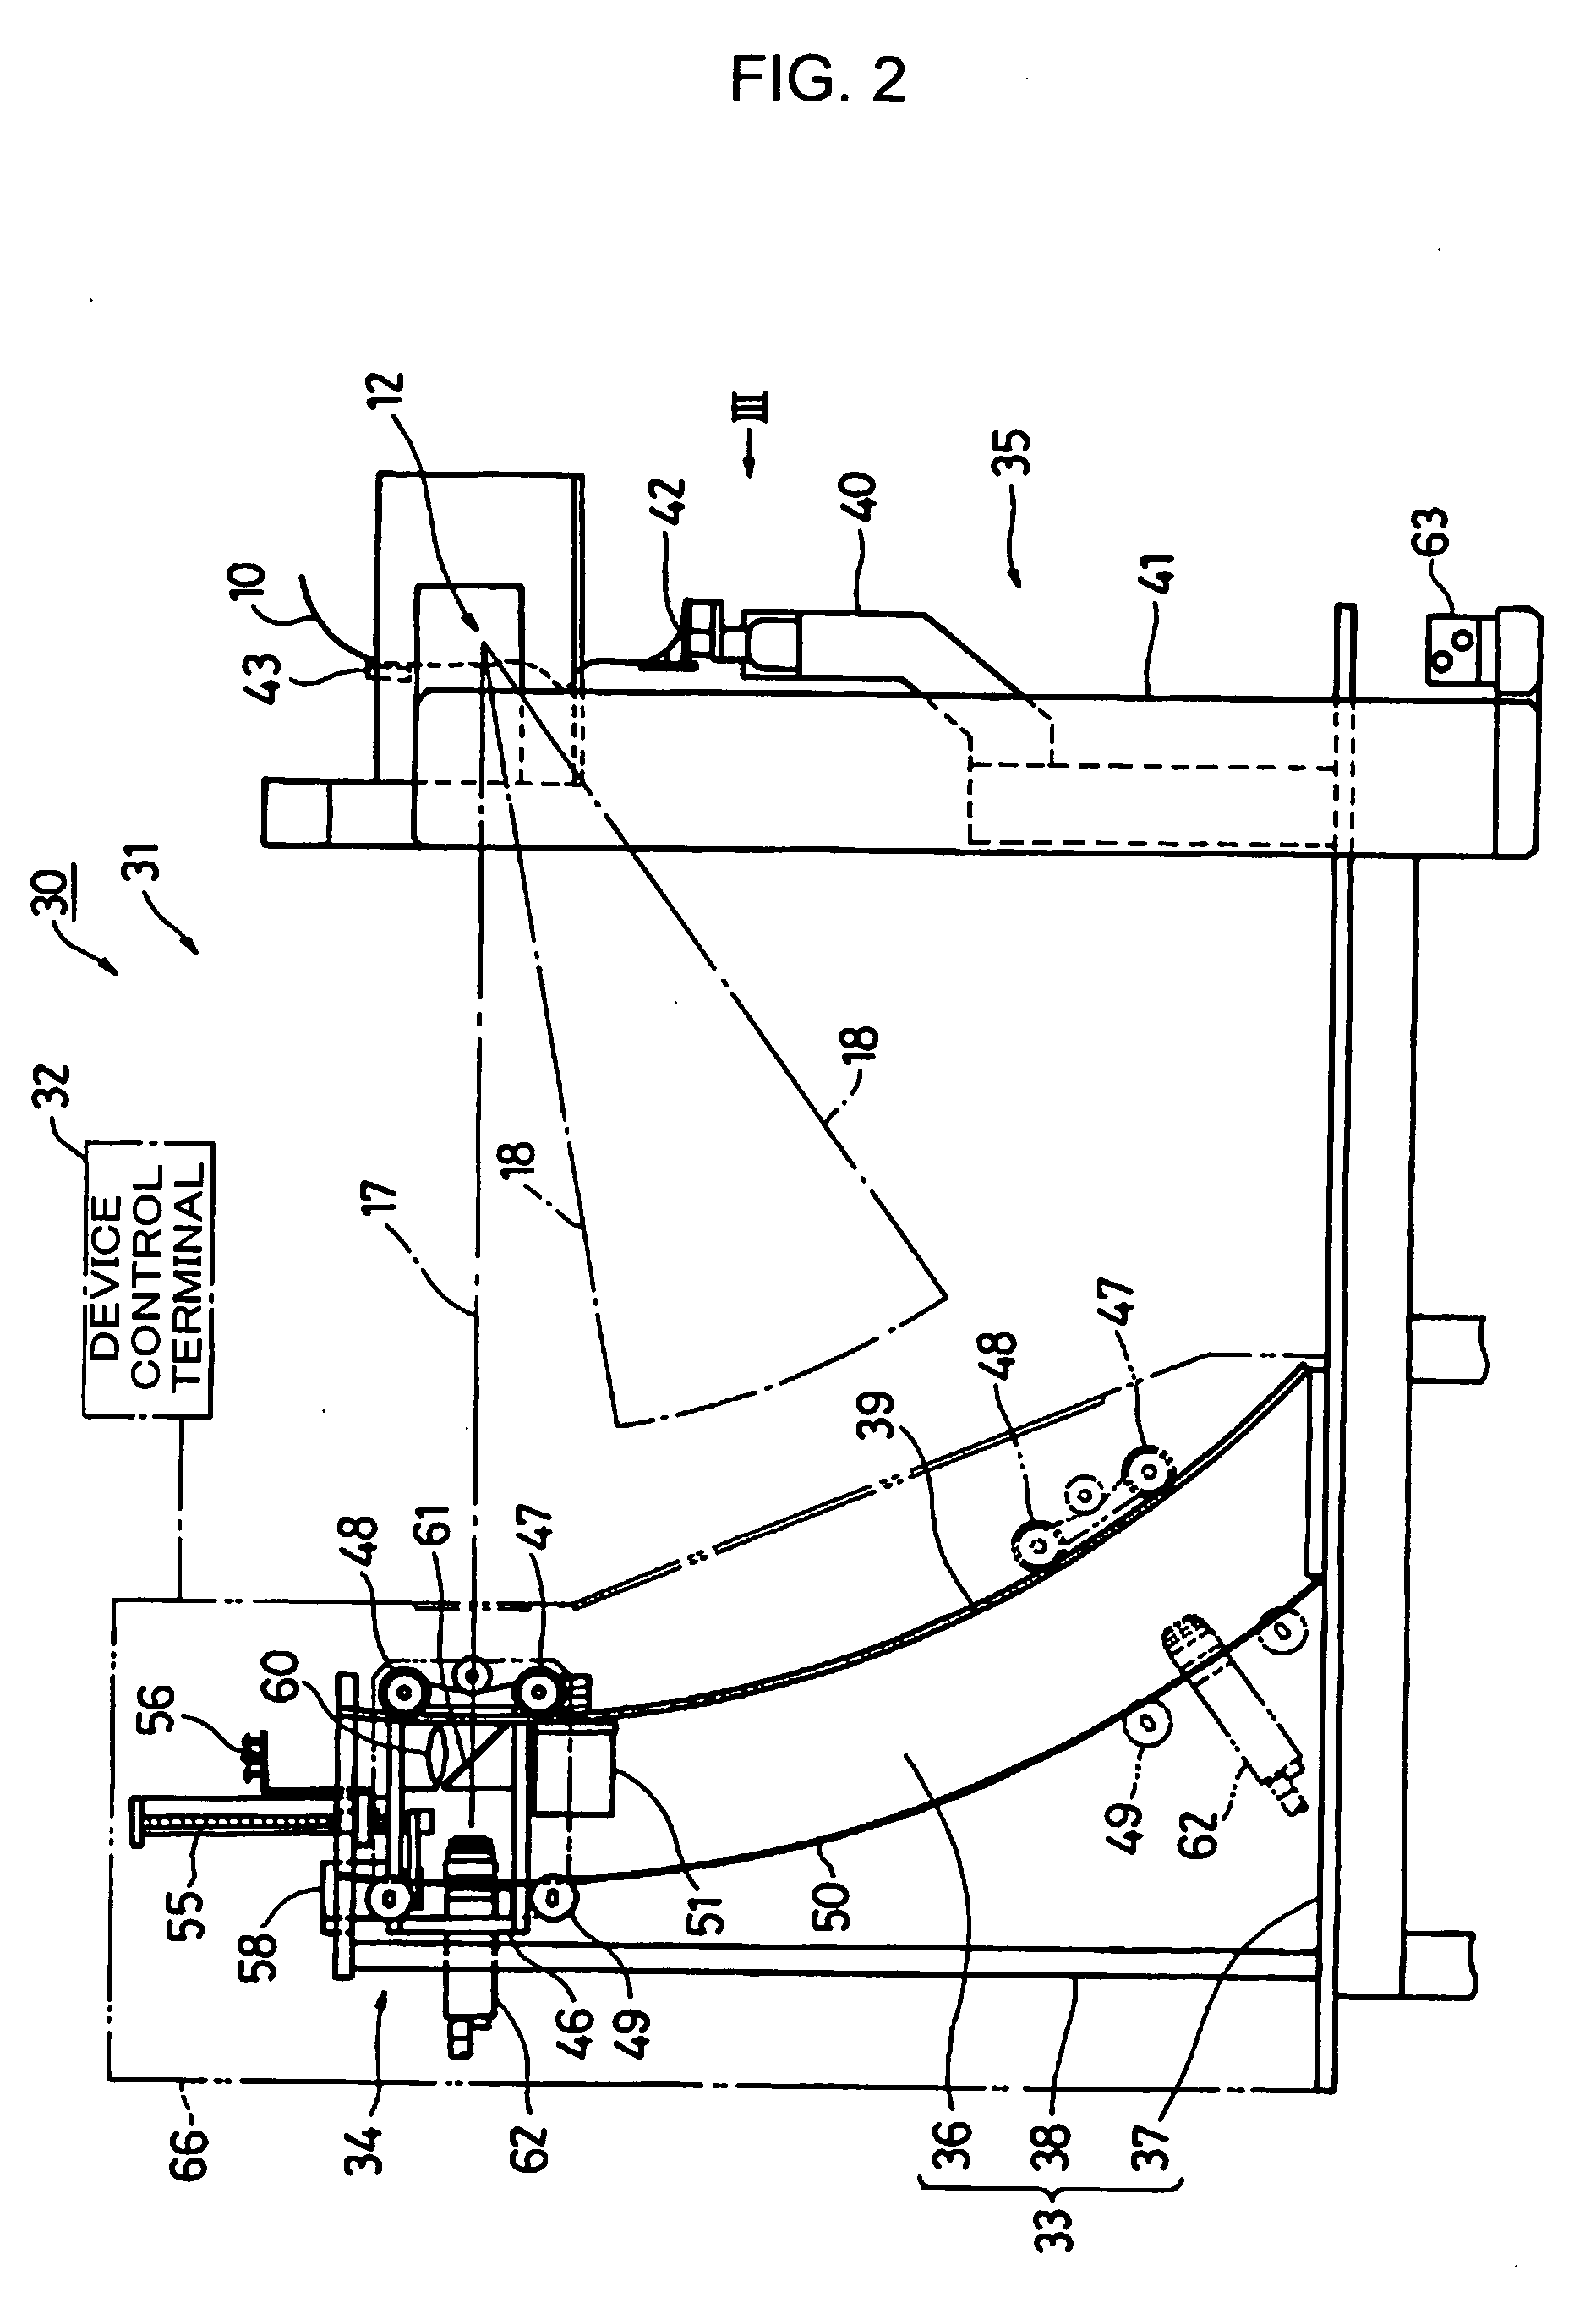 Spectacle lens supply system, spectacle wearing parameter measurement apparatus, spectacle wearing test system, spectacle lens, and spectacle